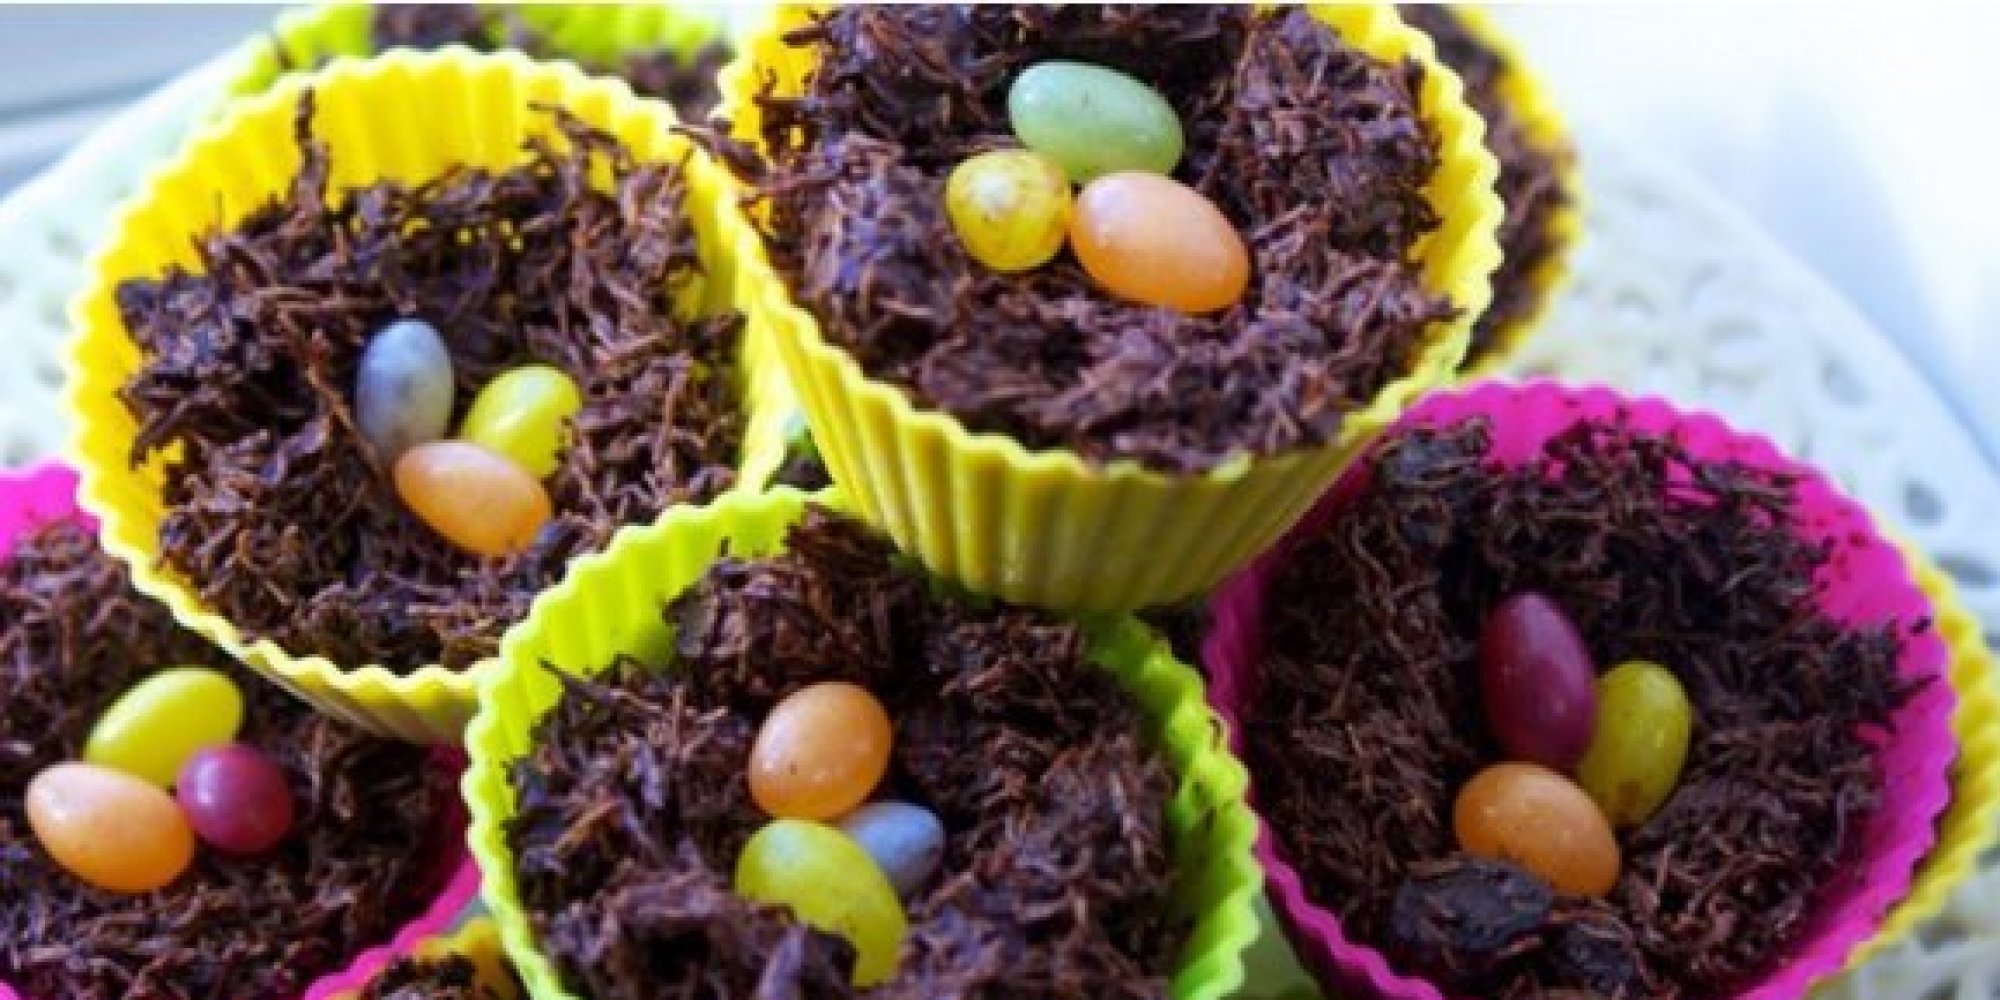 Chocolate Easter Nests Recipe To Make With Kids | HuffPost UK